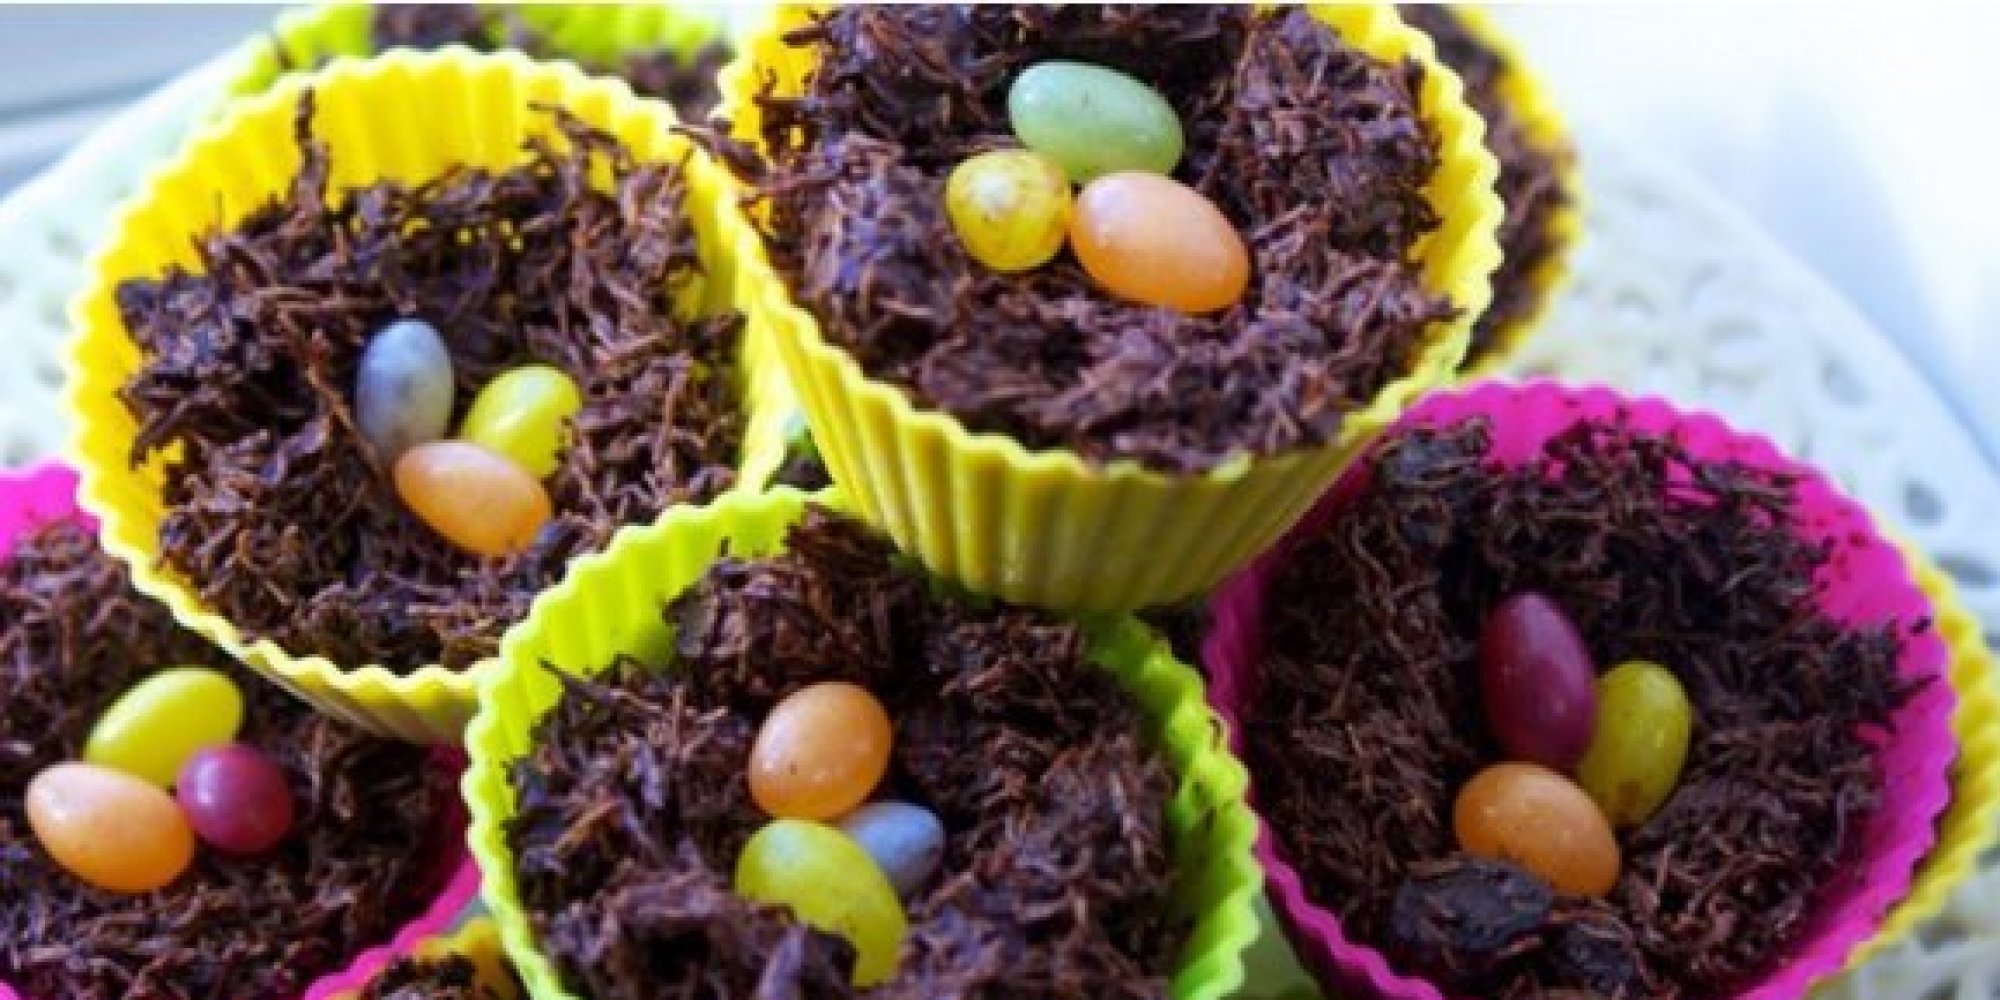 Chocolate Easter Nests Recipe To Make With Kids | HuffPost UK